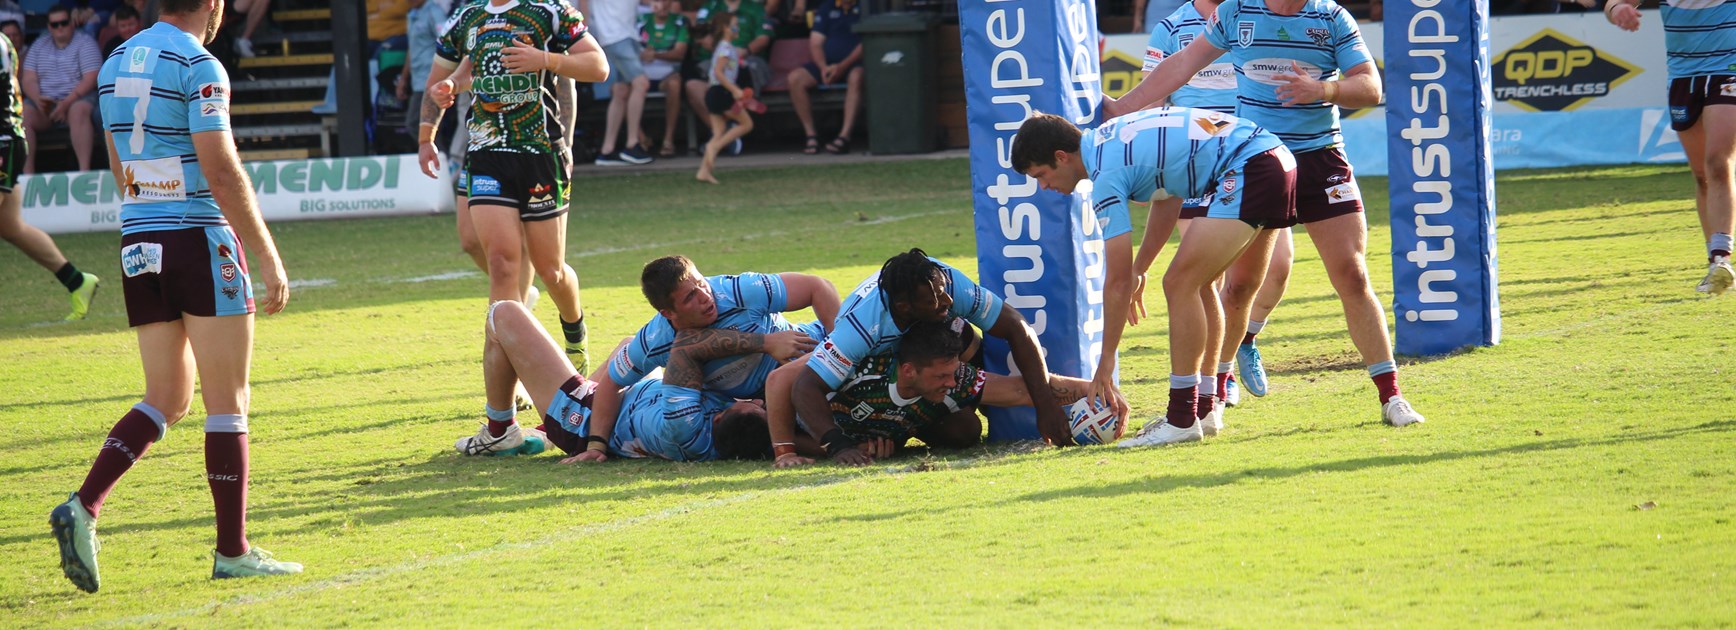 Kaufusi gets a hat-trick as Townsville overpower Capras